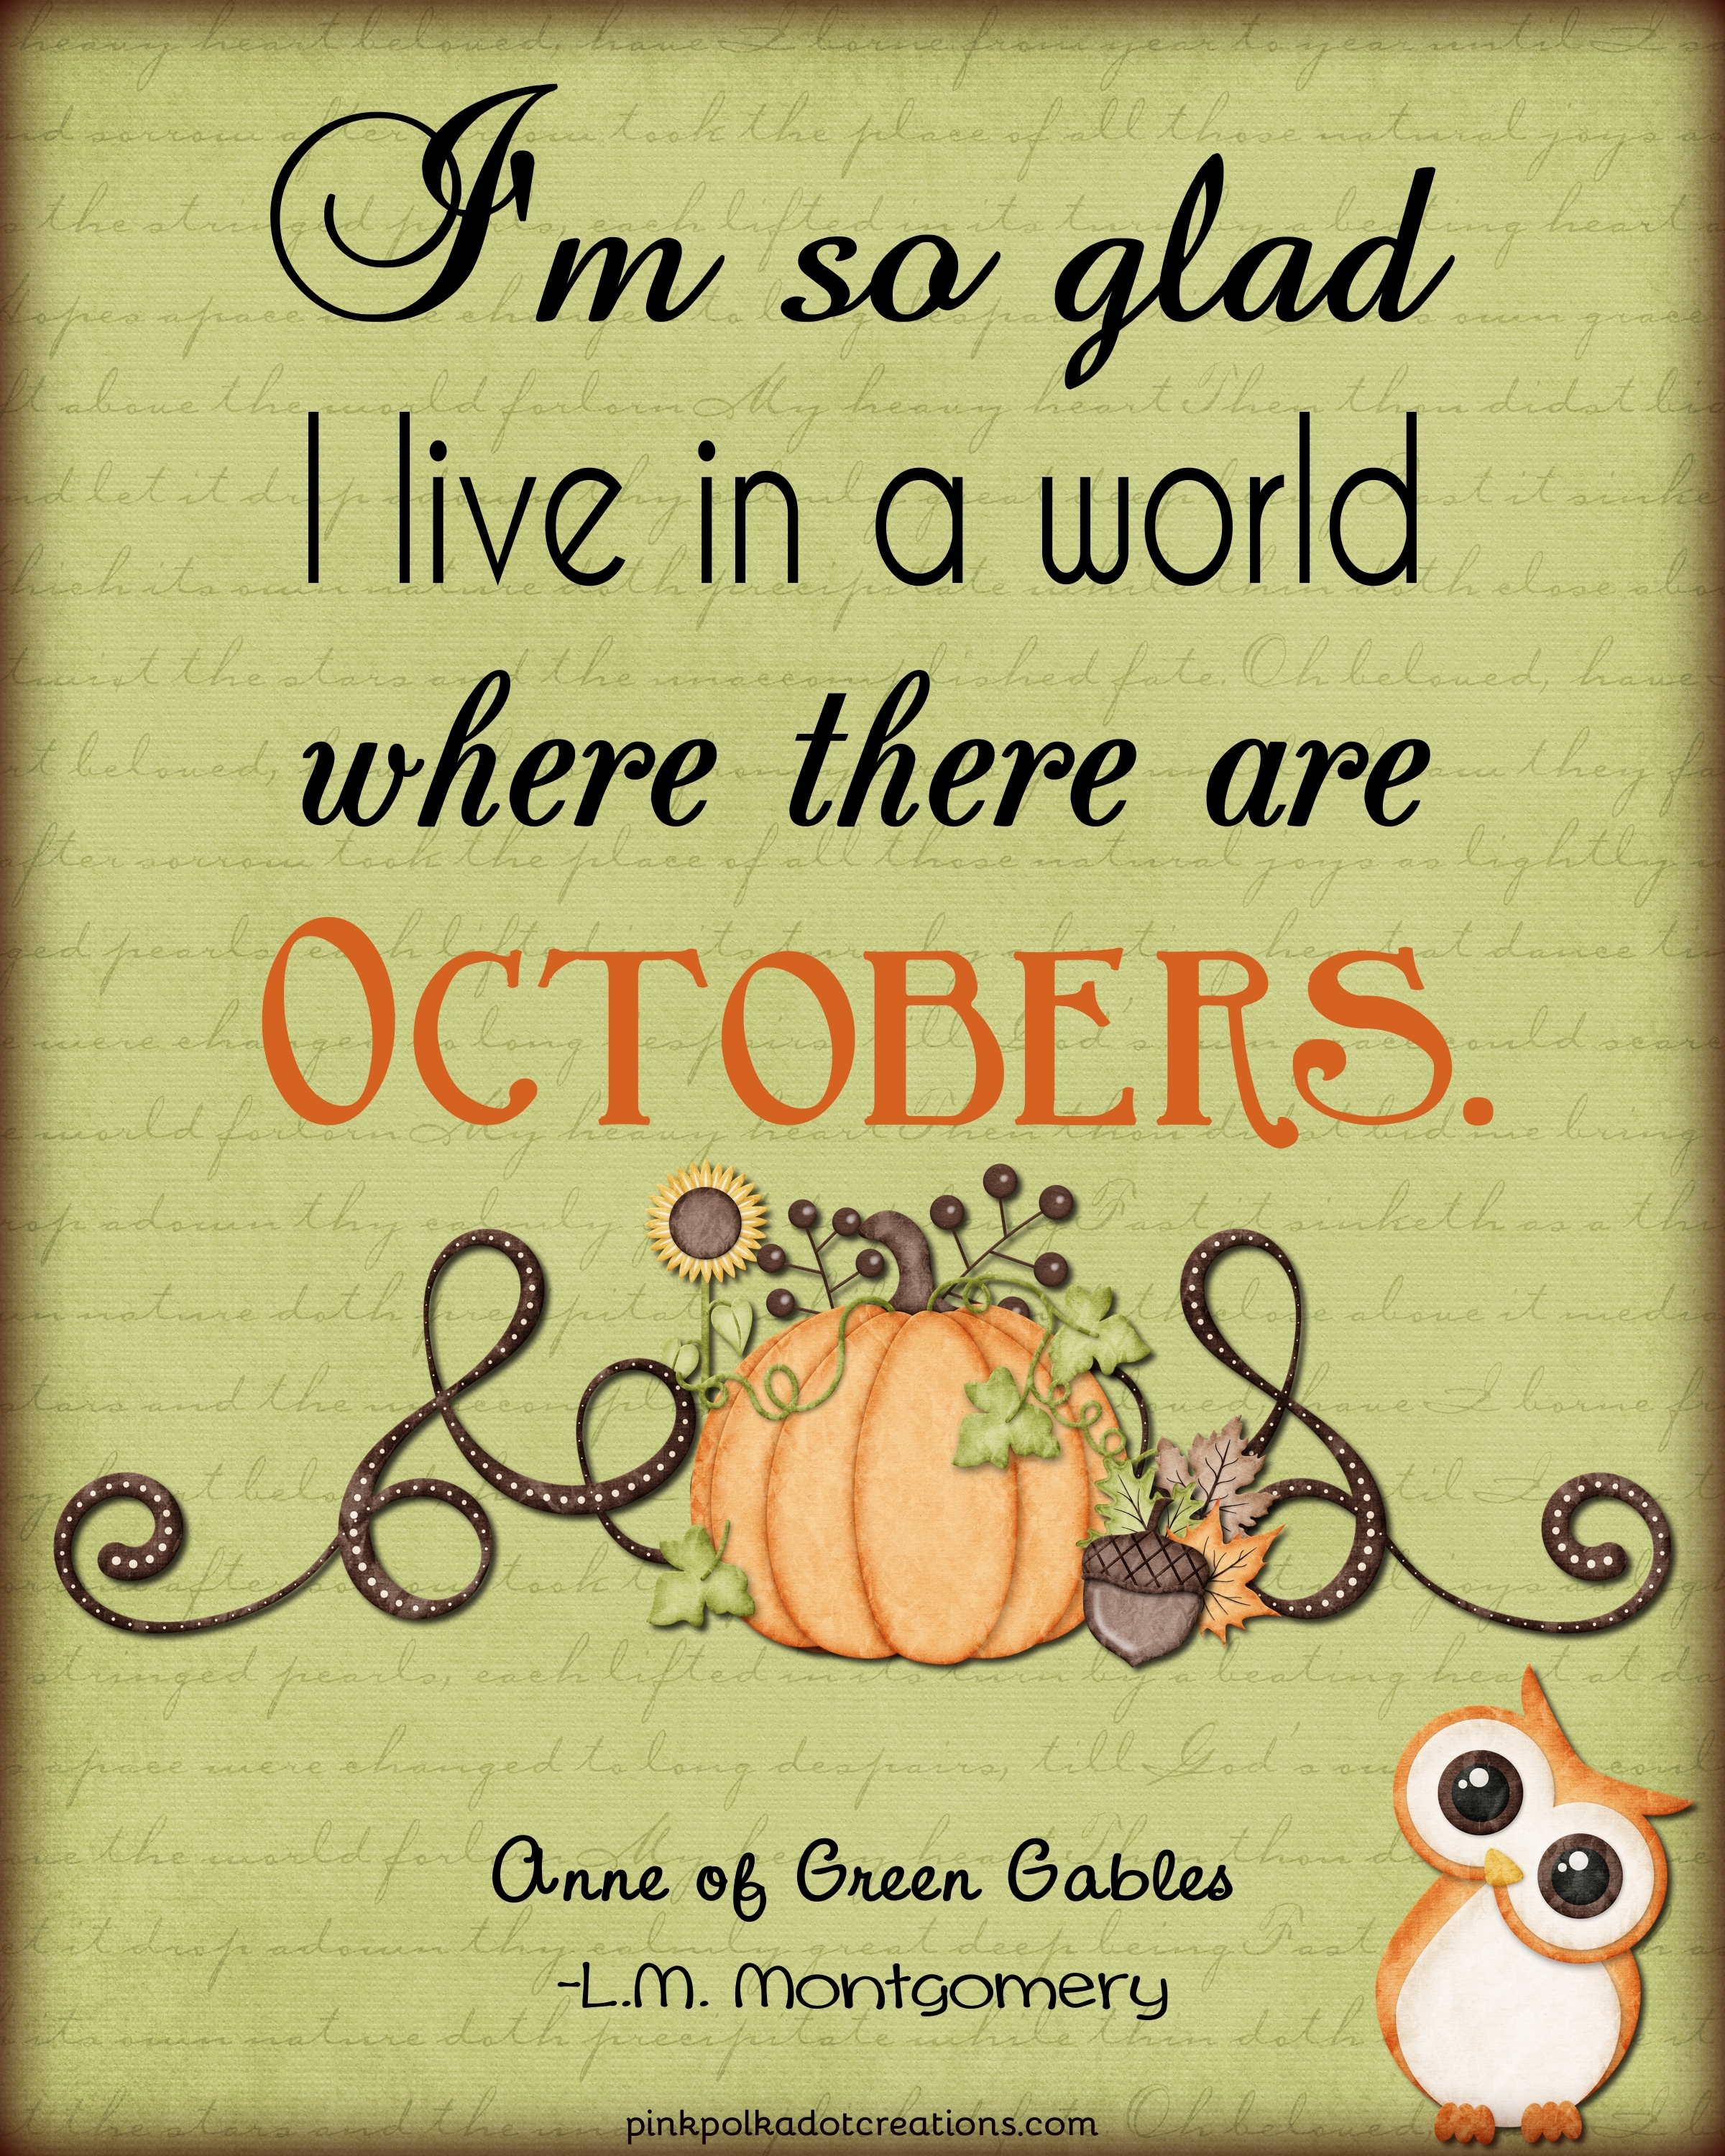 So glad I live in a world where there are Octobers Anne of Green Gables POSTER 